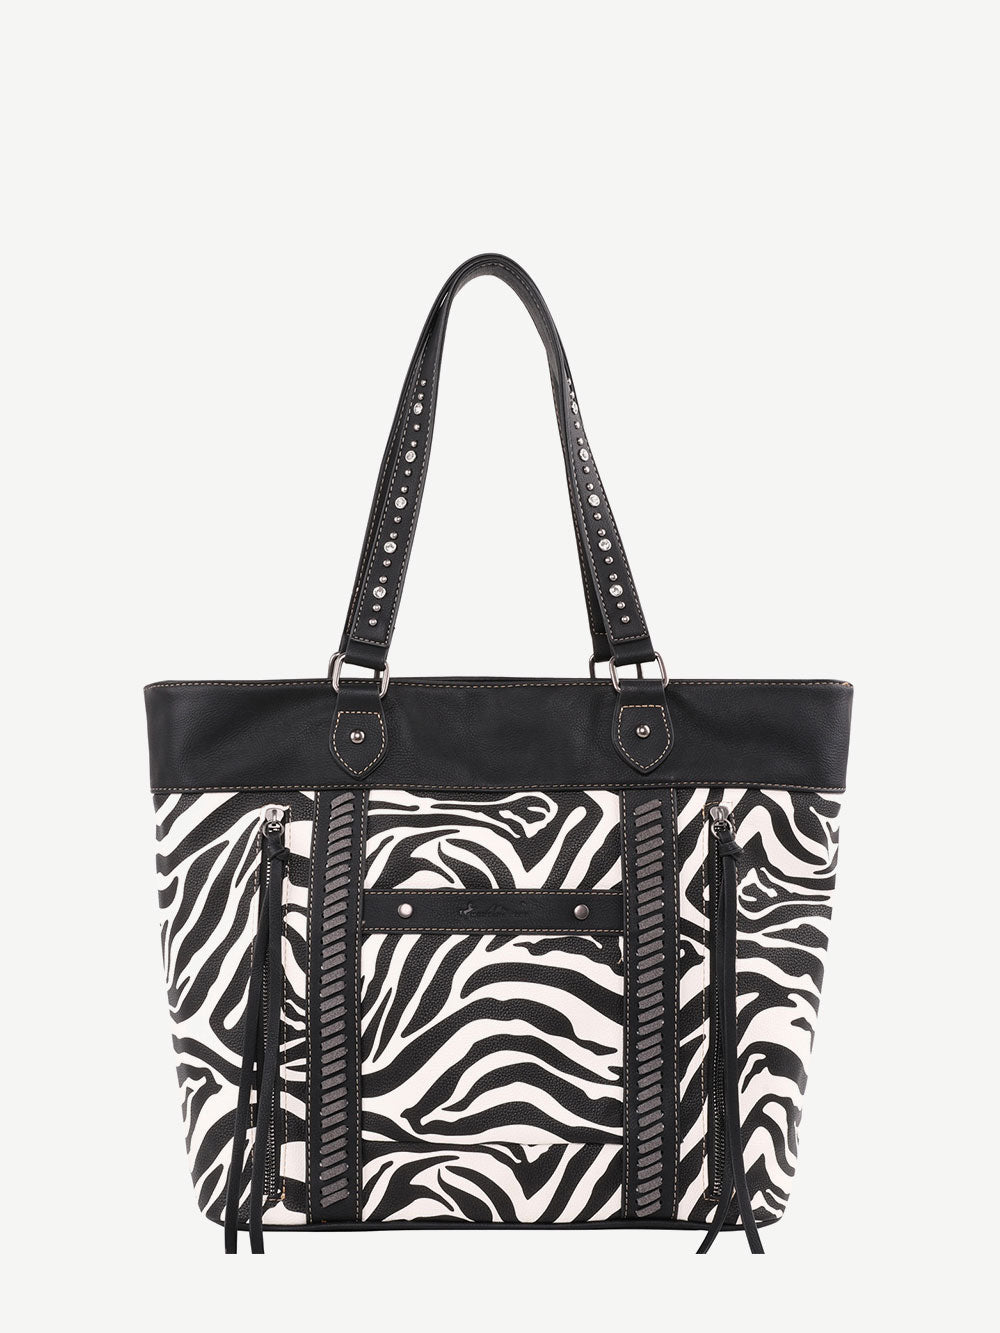 Montana West Animal Print Leather Tassel Concealed Carry Wide Tote - Montana West World